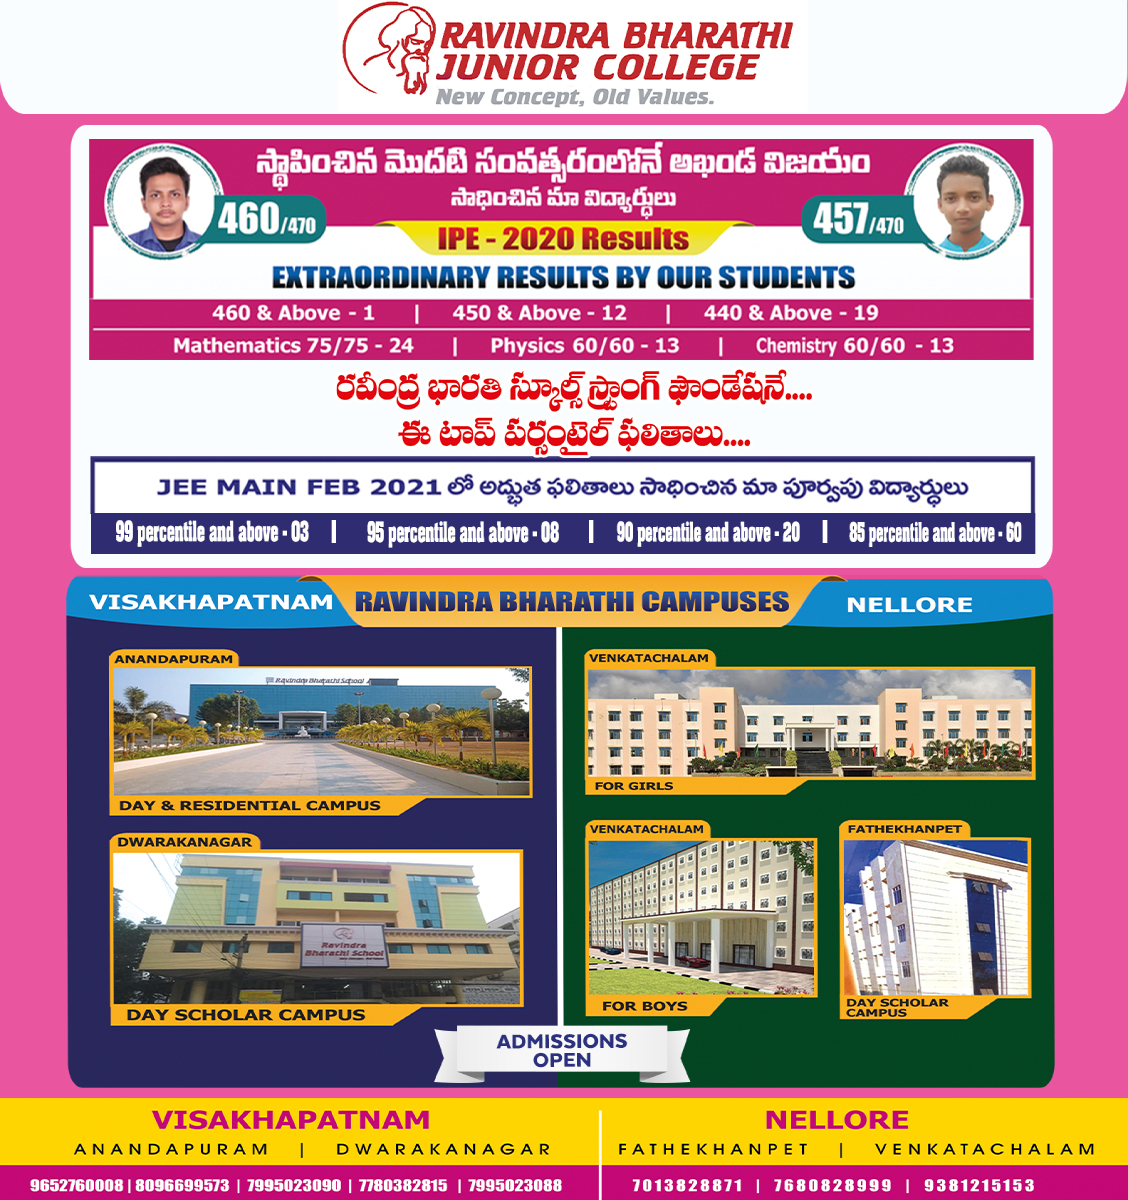 Welcome to Ravindra Bharathi Schools | New Concept, Old Values ::